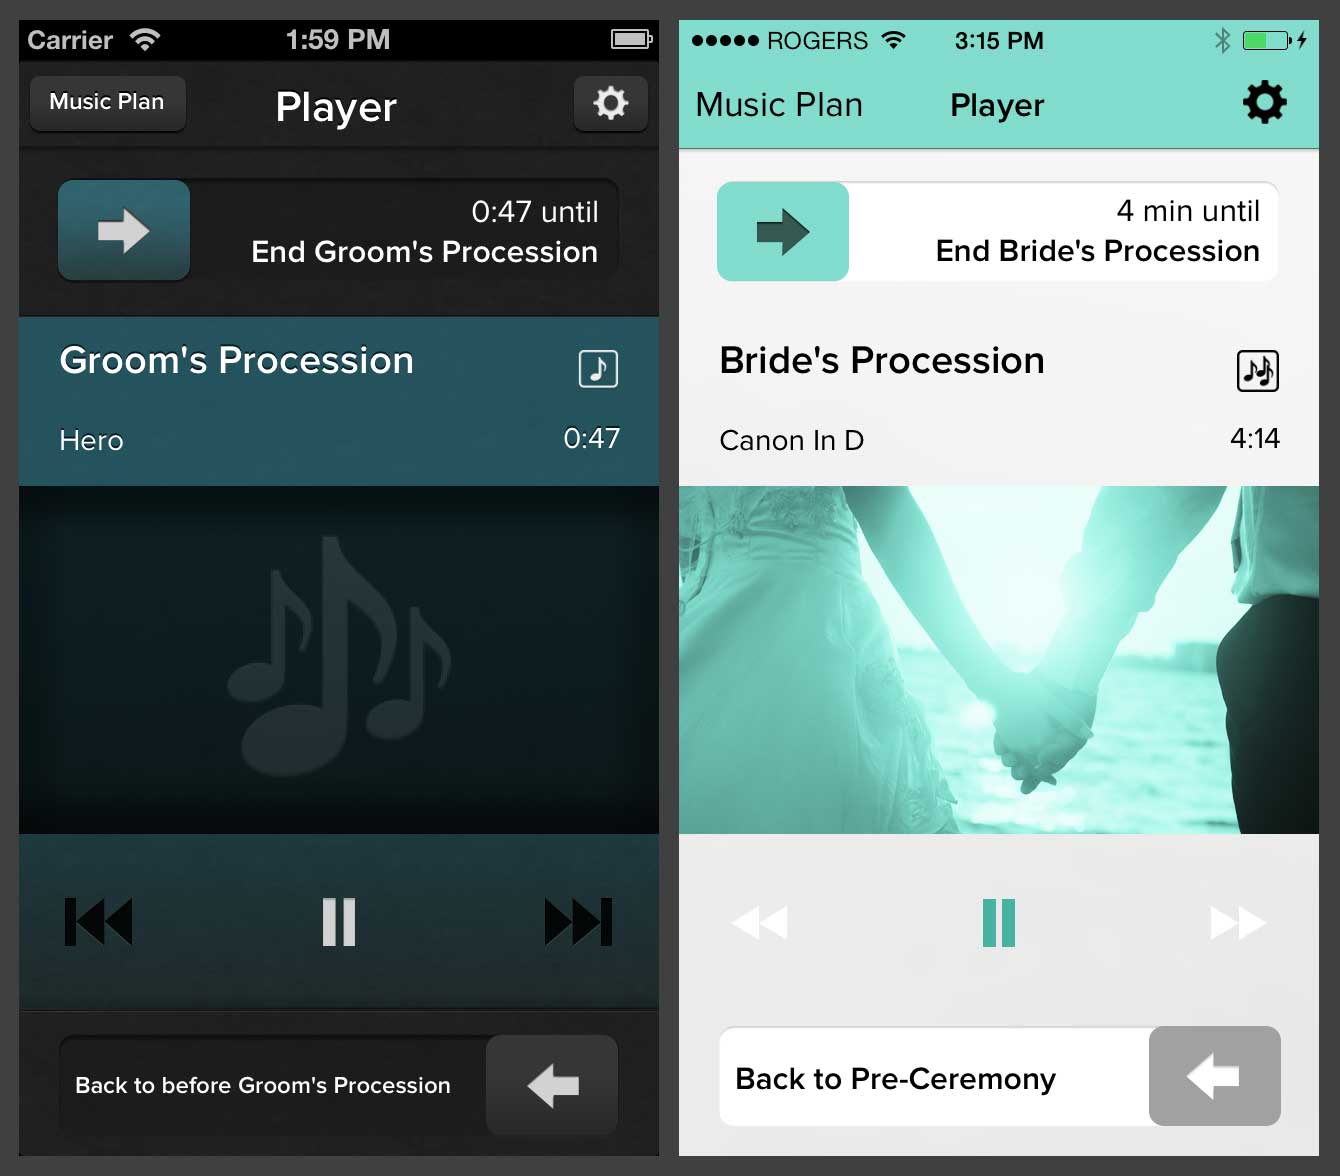 Side-by-side comparison of WeddingDJ's in-app player with the old dark mode UI versus the new cleaner light mode UI